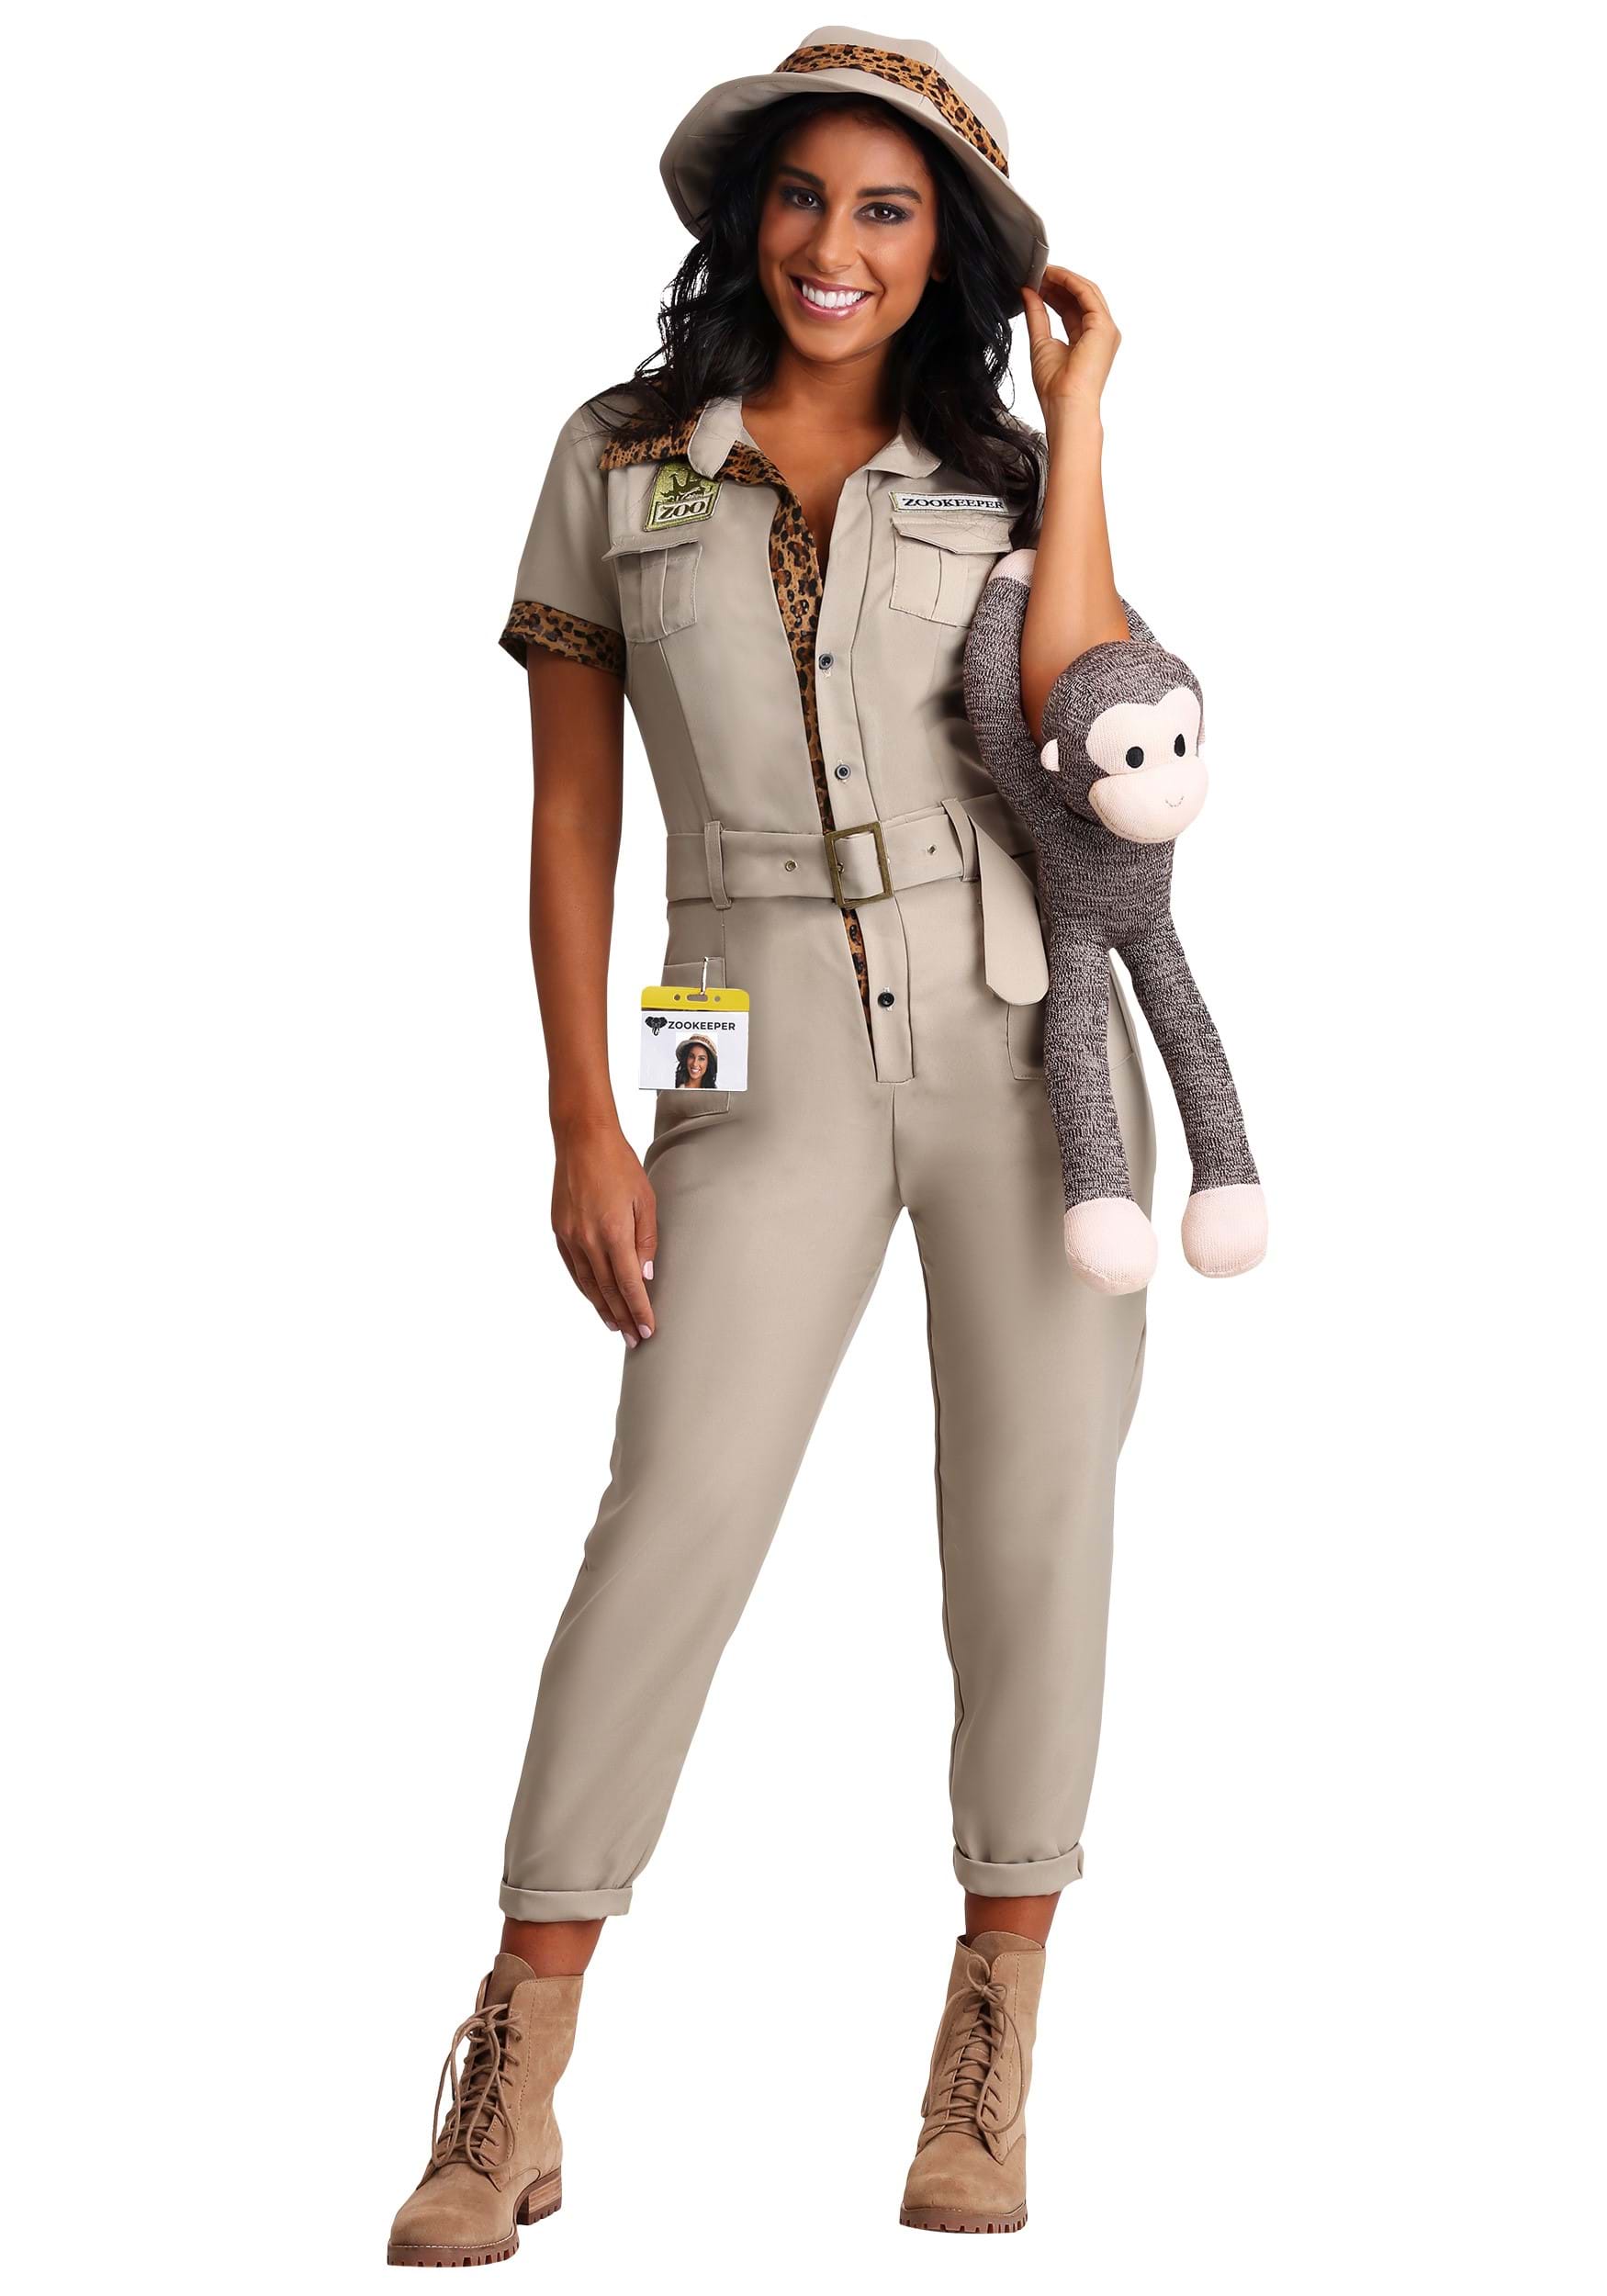 Explore the World of Zookeepers with Family Halloween Costumes